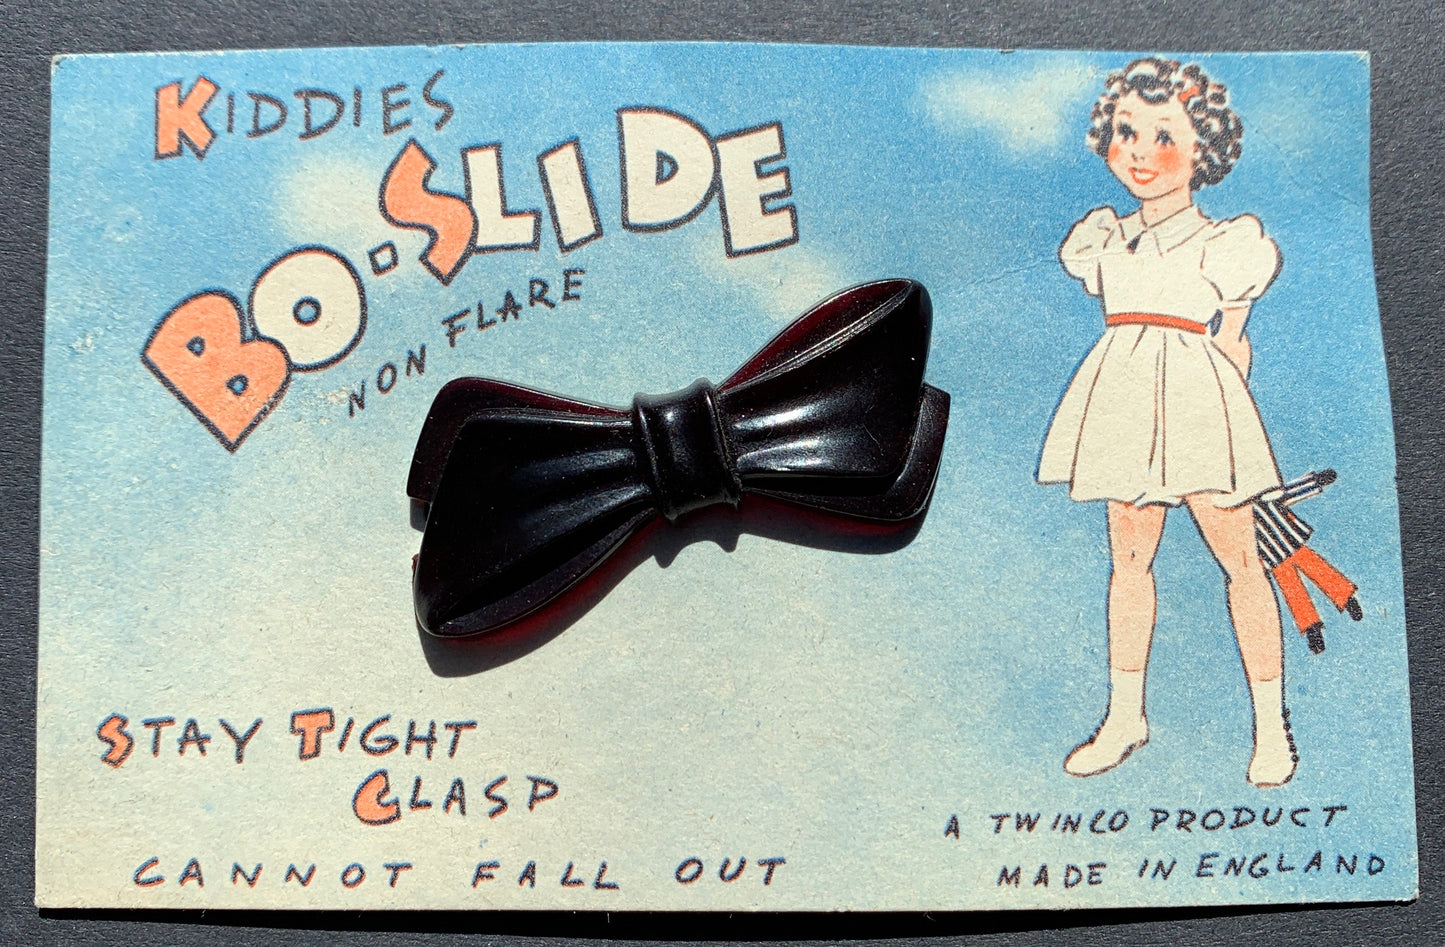 Sweet 1940s "KIDDIES BO-SLIDE" Made in England - Choice of colours